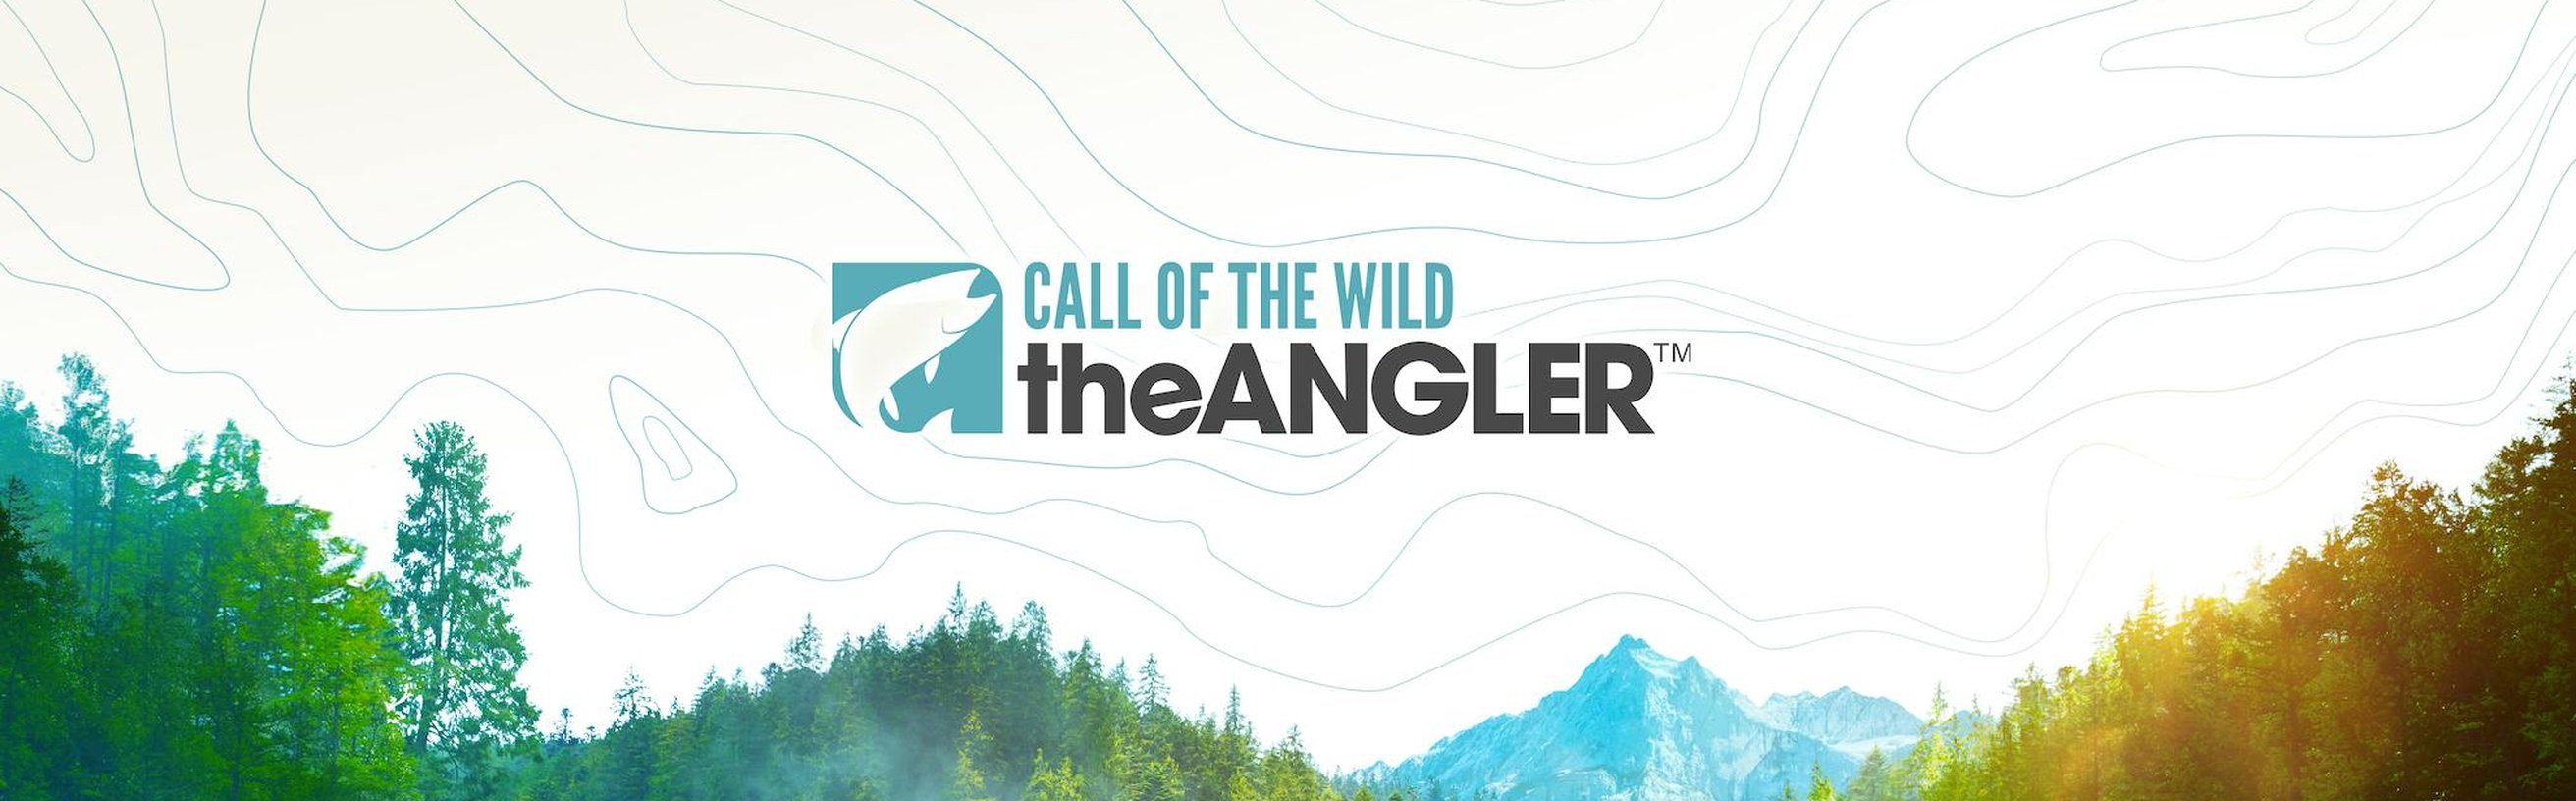 theHunter: Call of the Wild™  Download and Buy Today - Epic Games Store